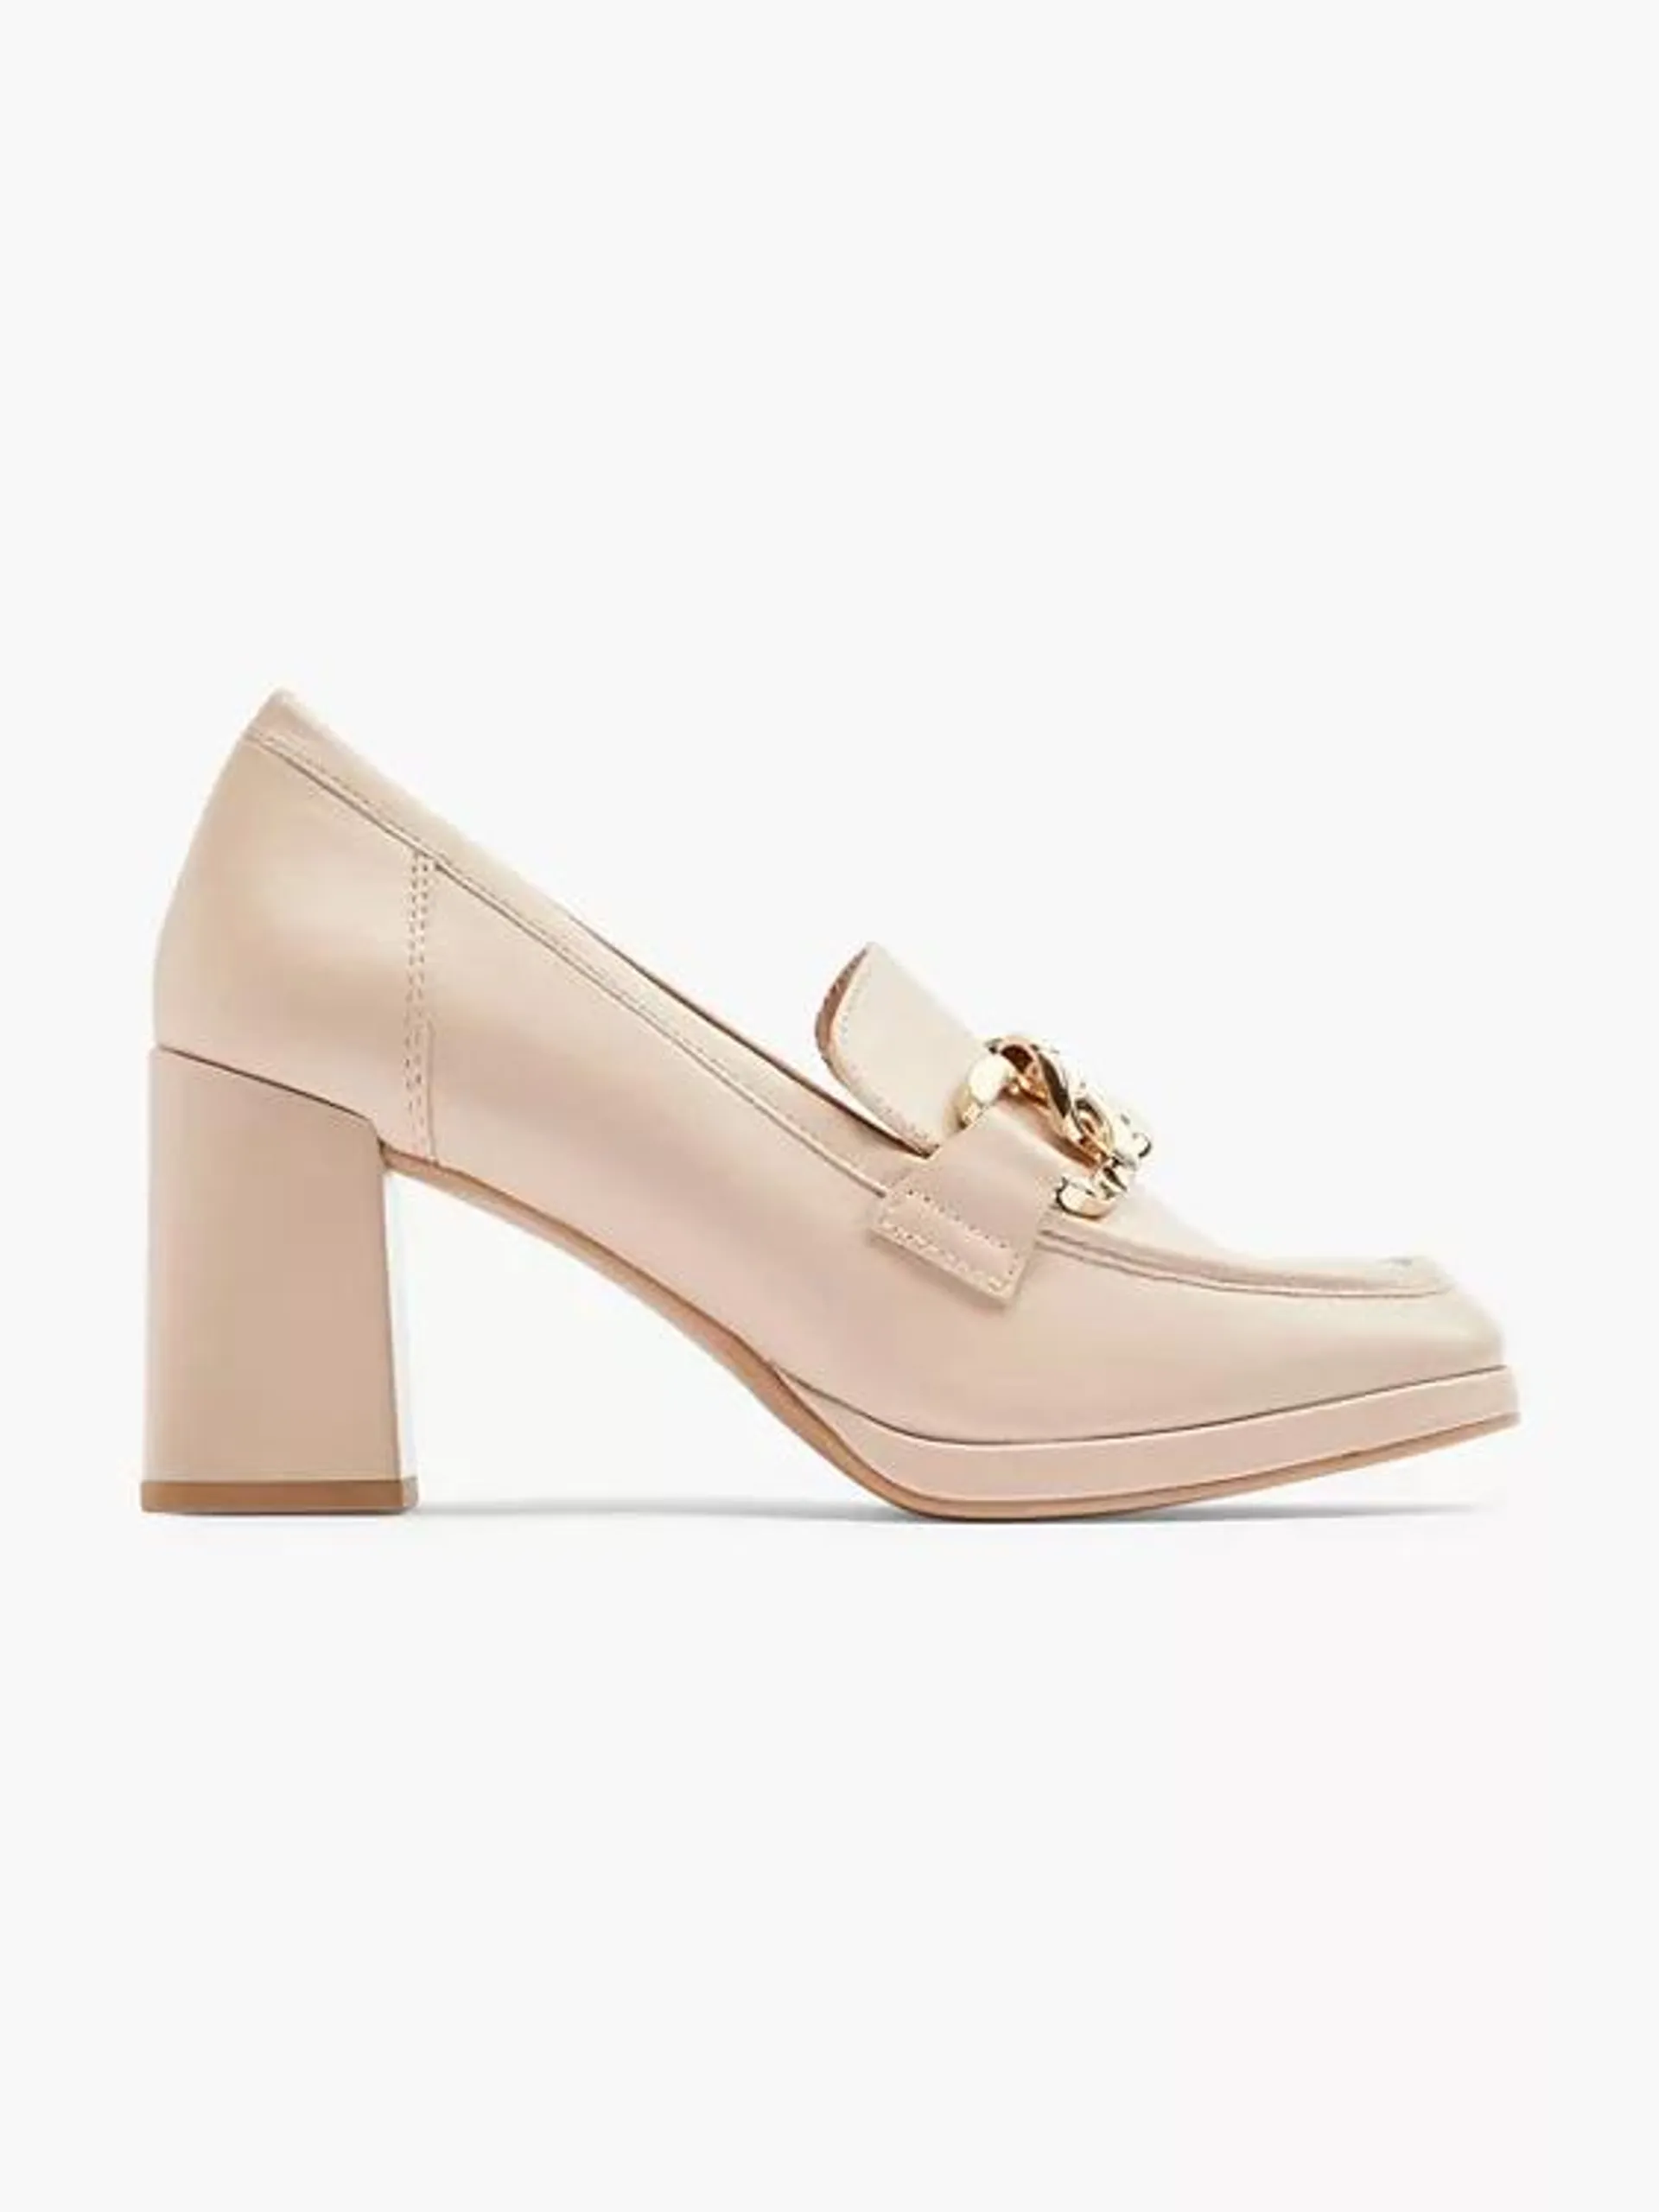 Nude Heeled Loafer with Chain Detail